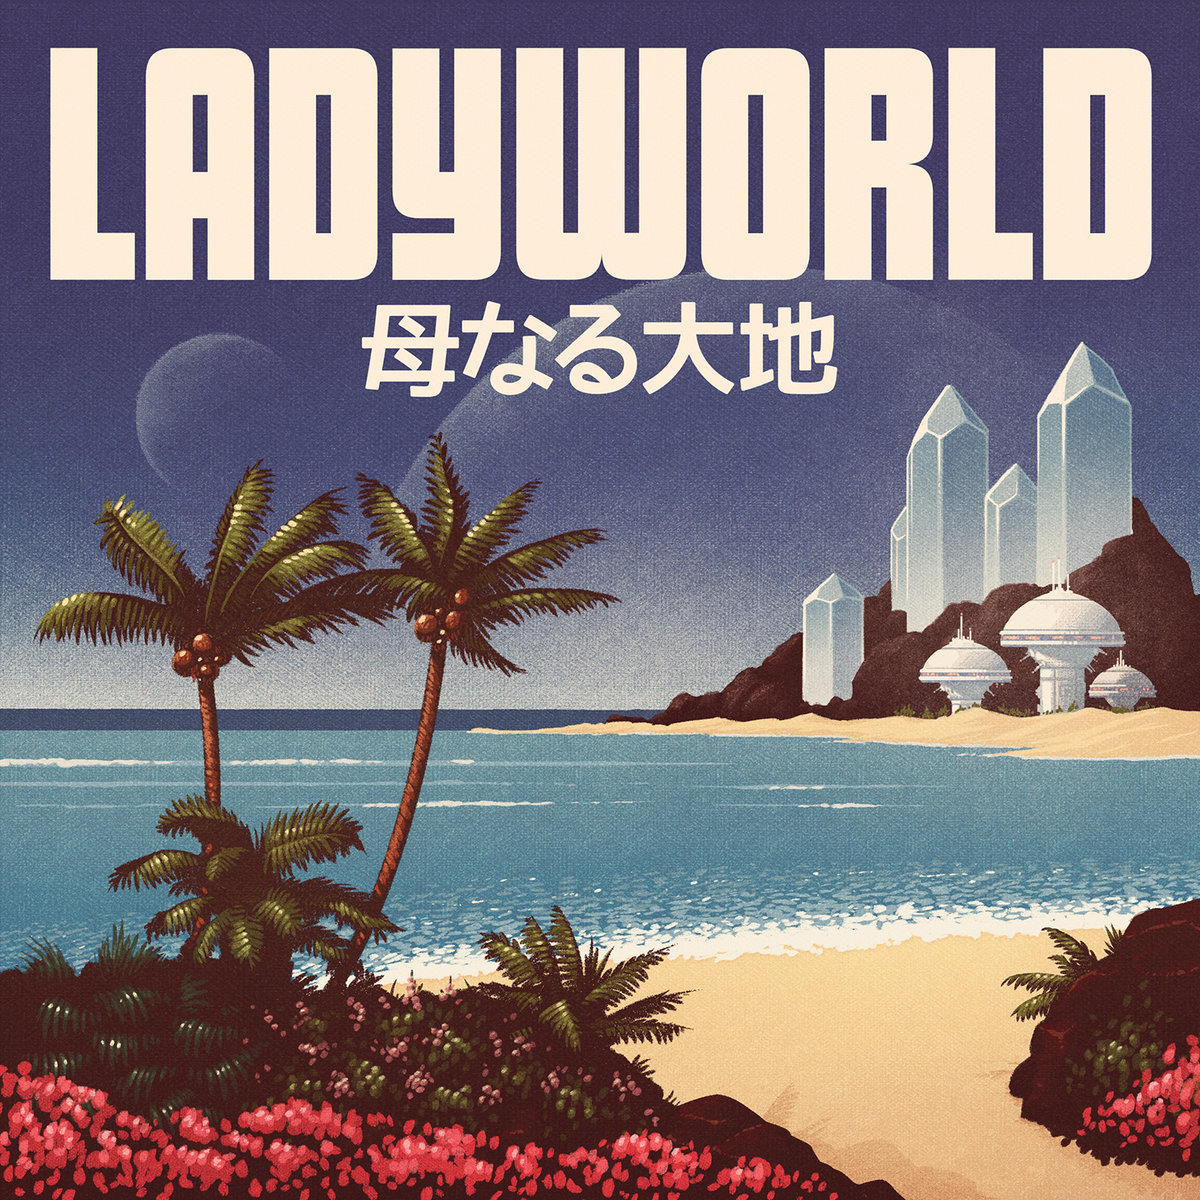 I will never get tired of ladyworld